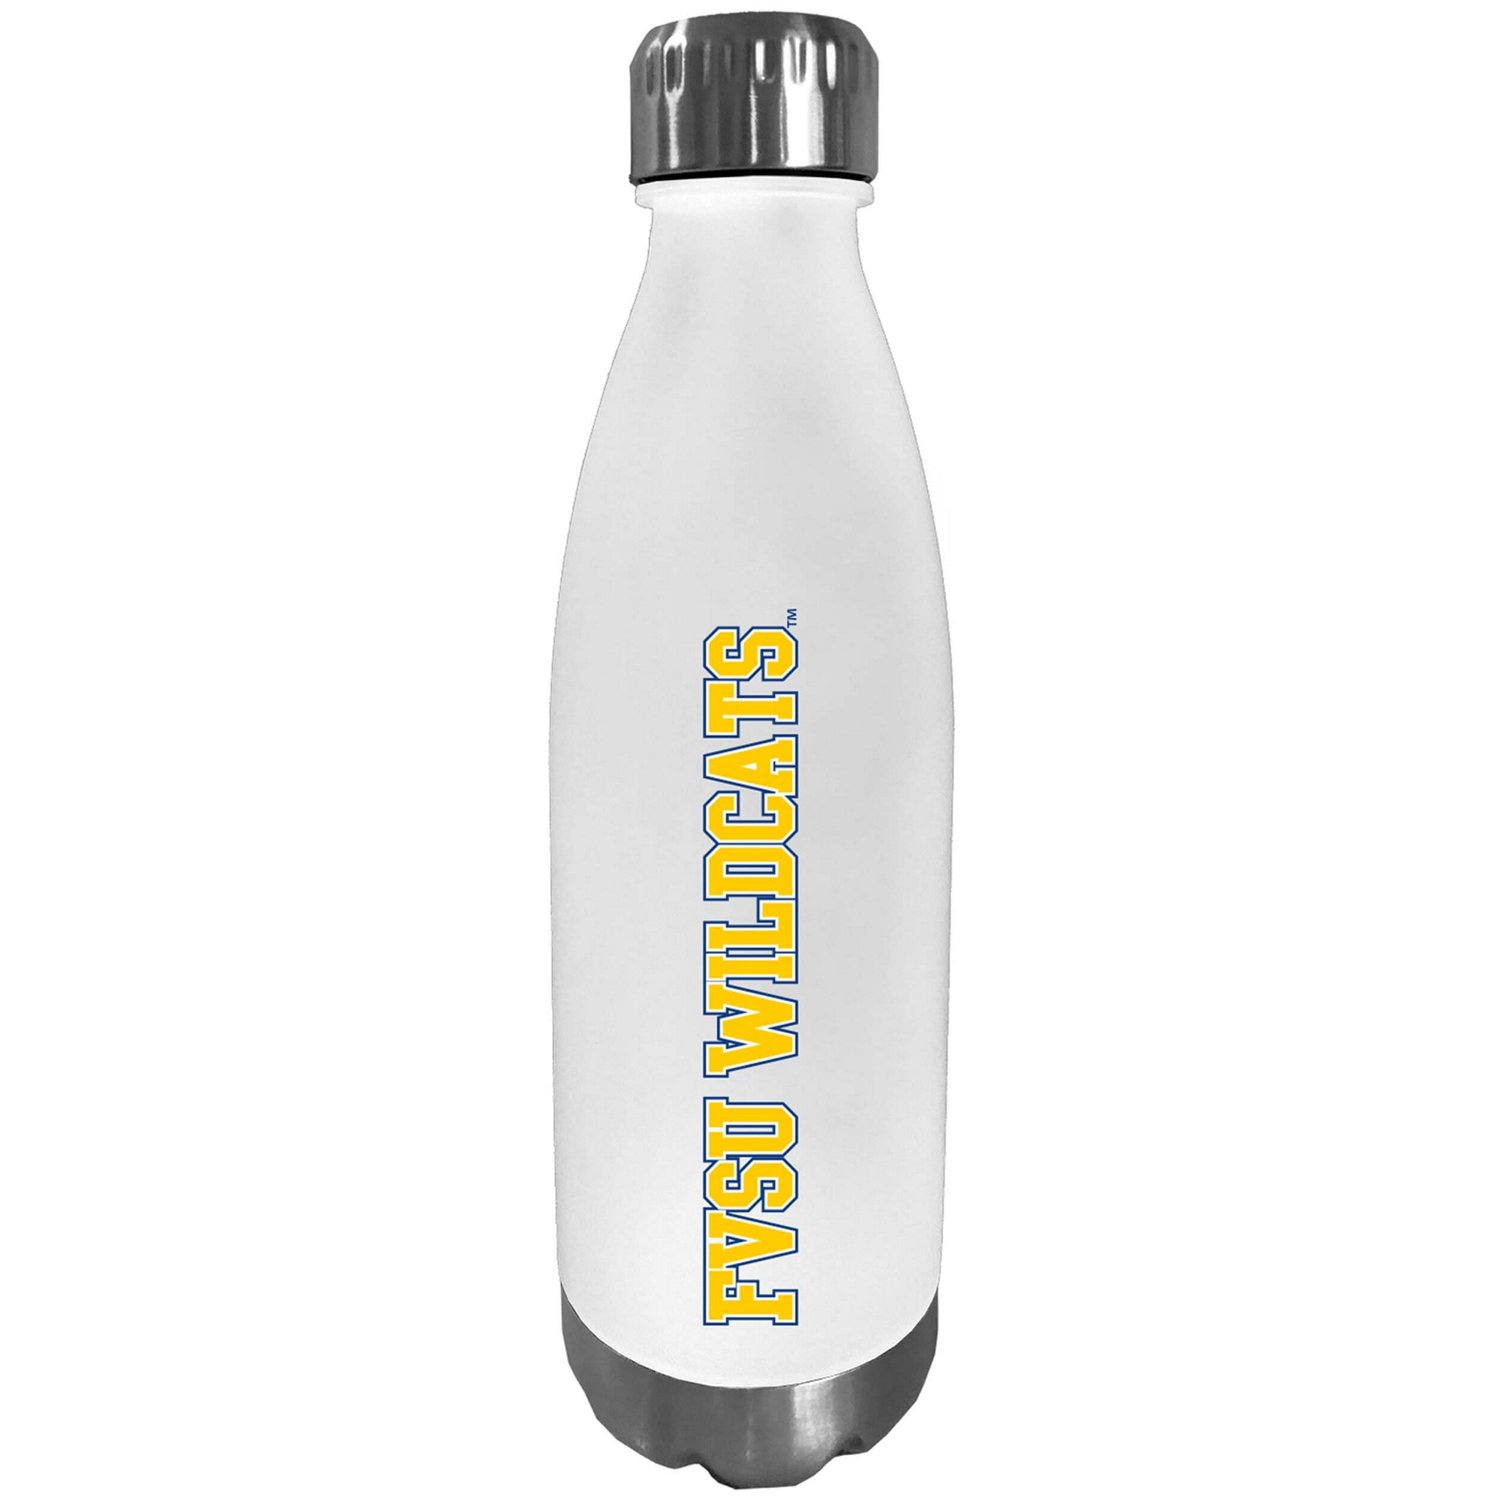 https://academy.scene7.com/is/image/academy//novelty/fort-valley-state-wildcats-24oz-frosted-bullet-water-bottle-fvsu-fan-fblt24-white-white/54df93ef2ad94891bf185c3ce7180835?$pdp-mobile-gallery-ng$